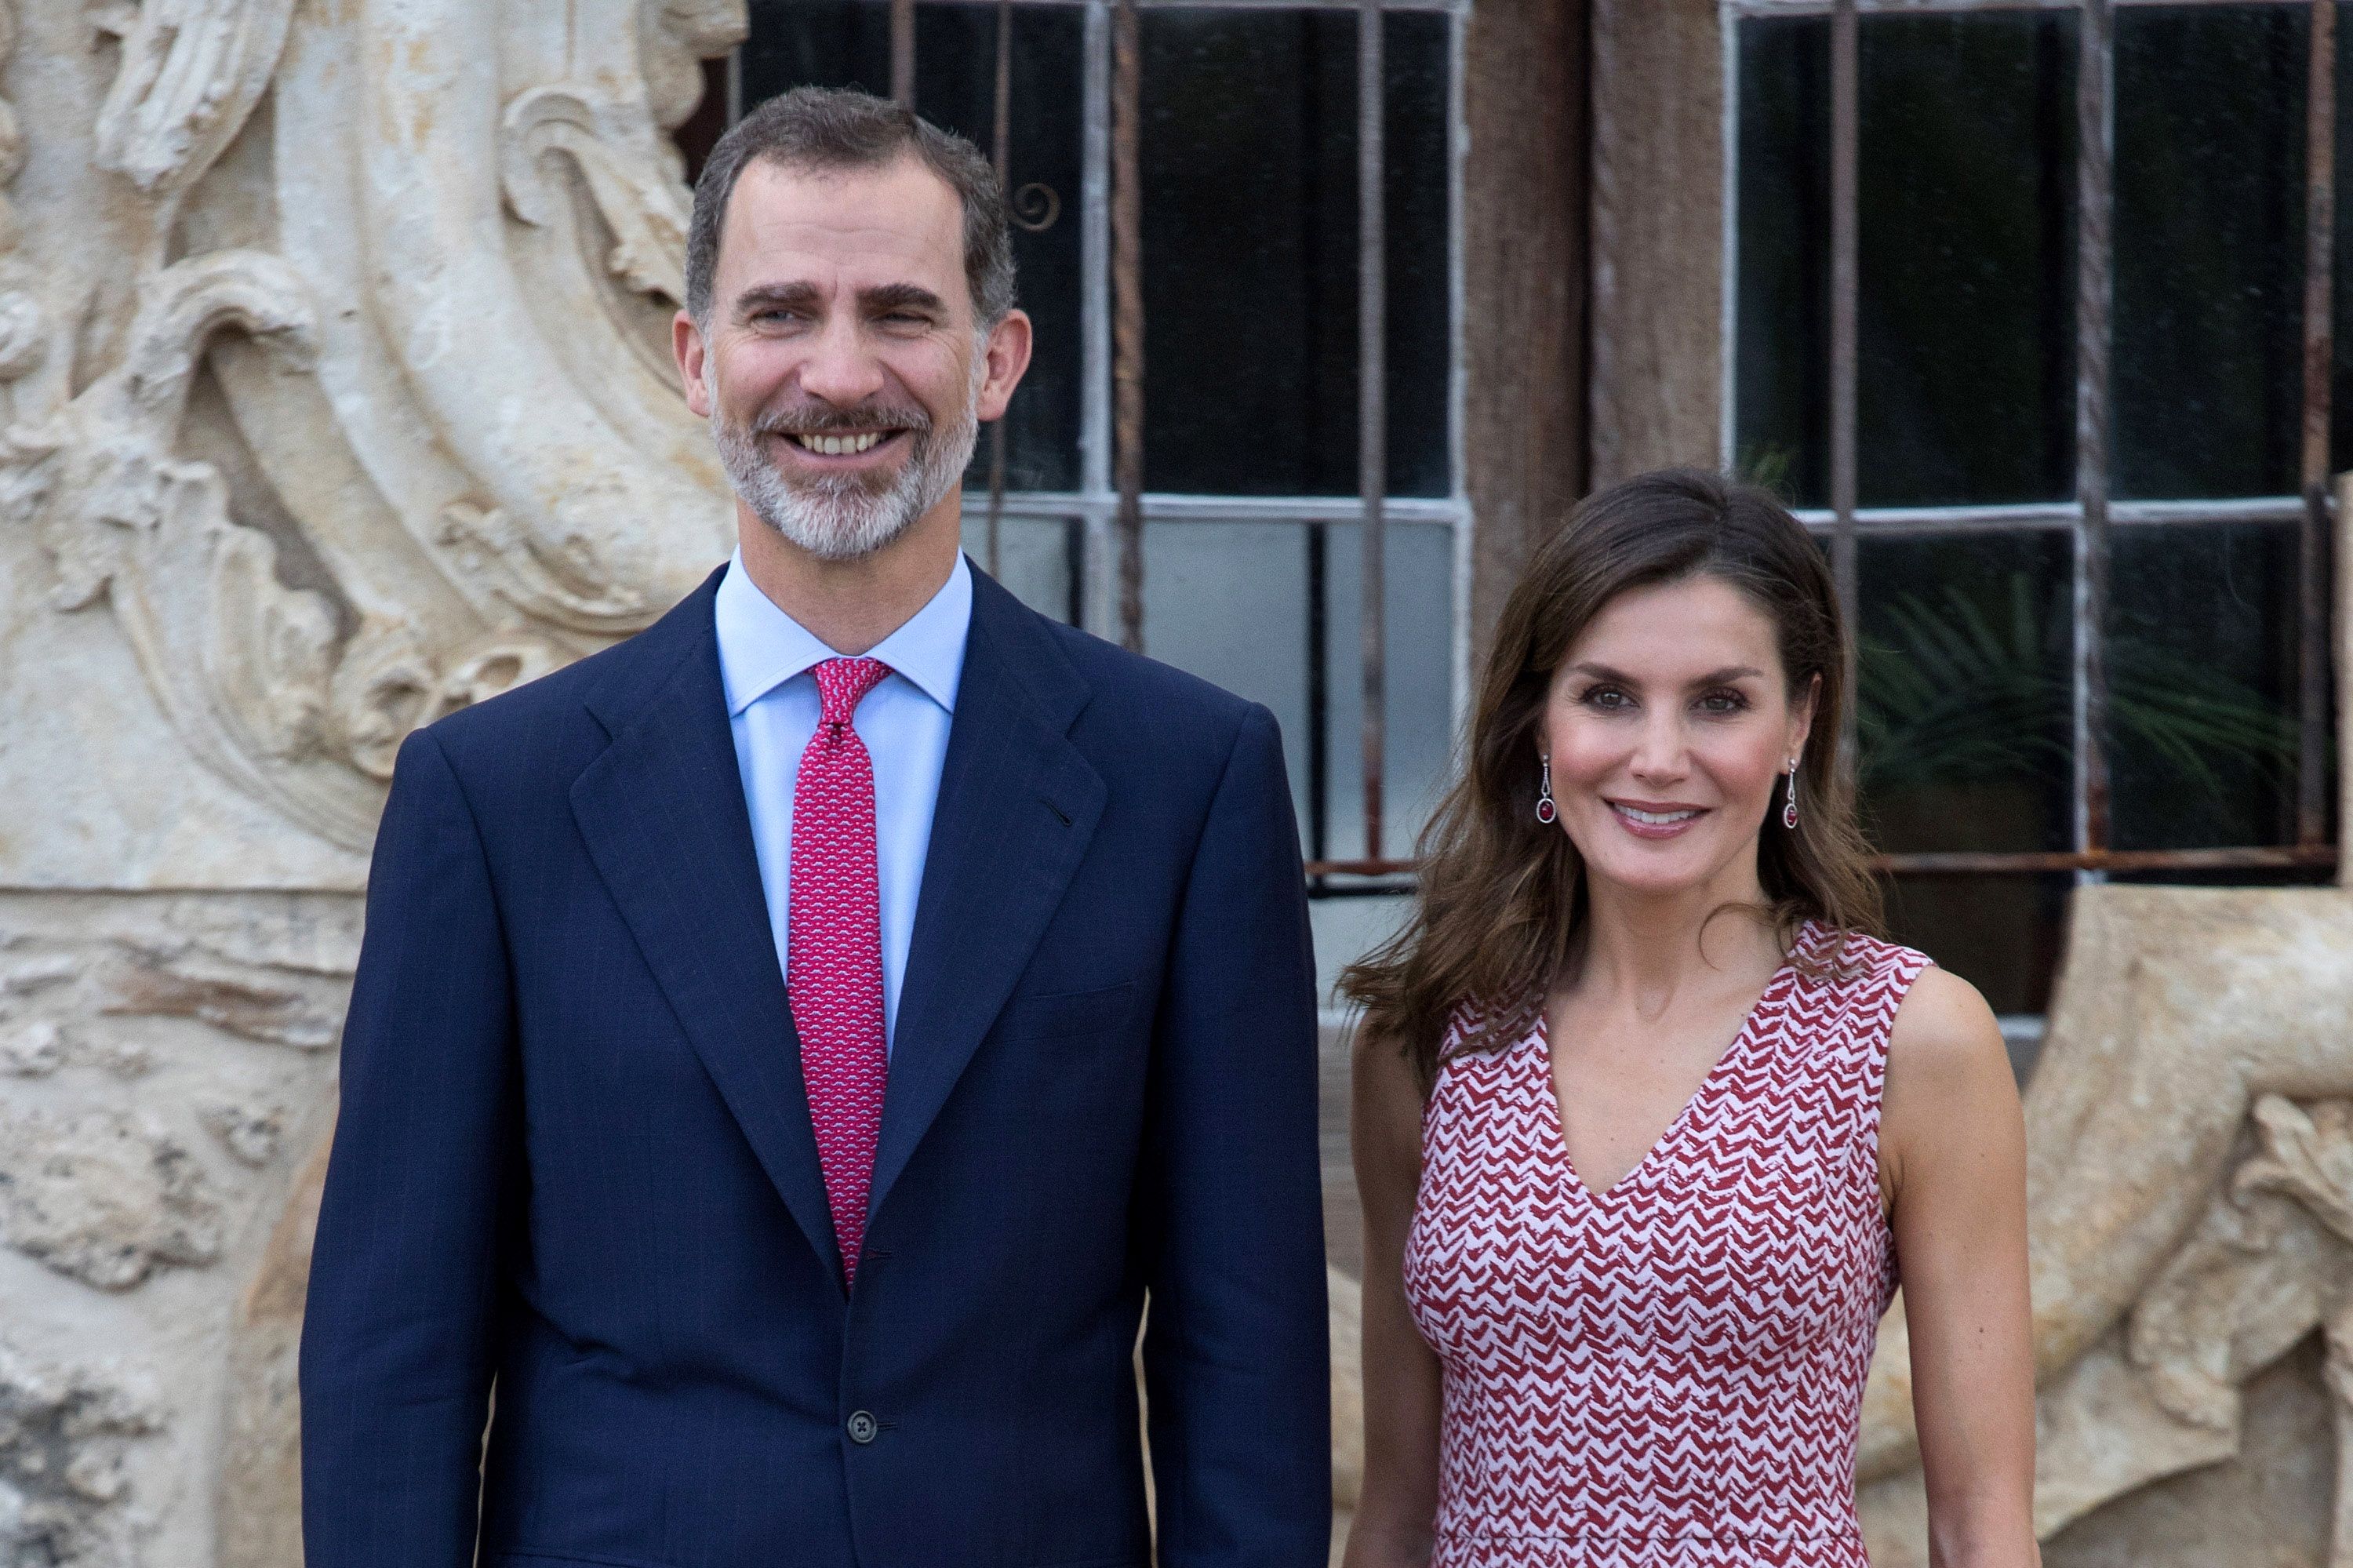 Meet Felipe and Letizia, the new king and queen of Spain - Los Angeles Times